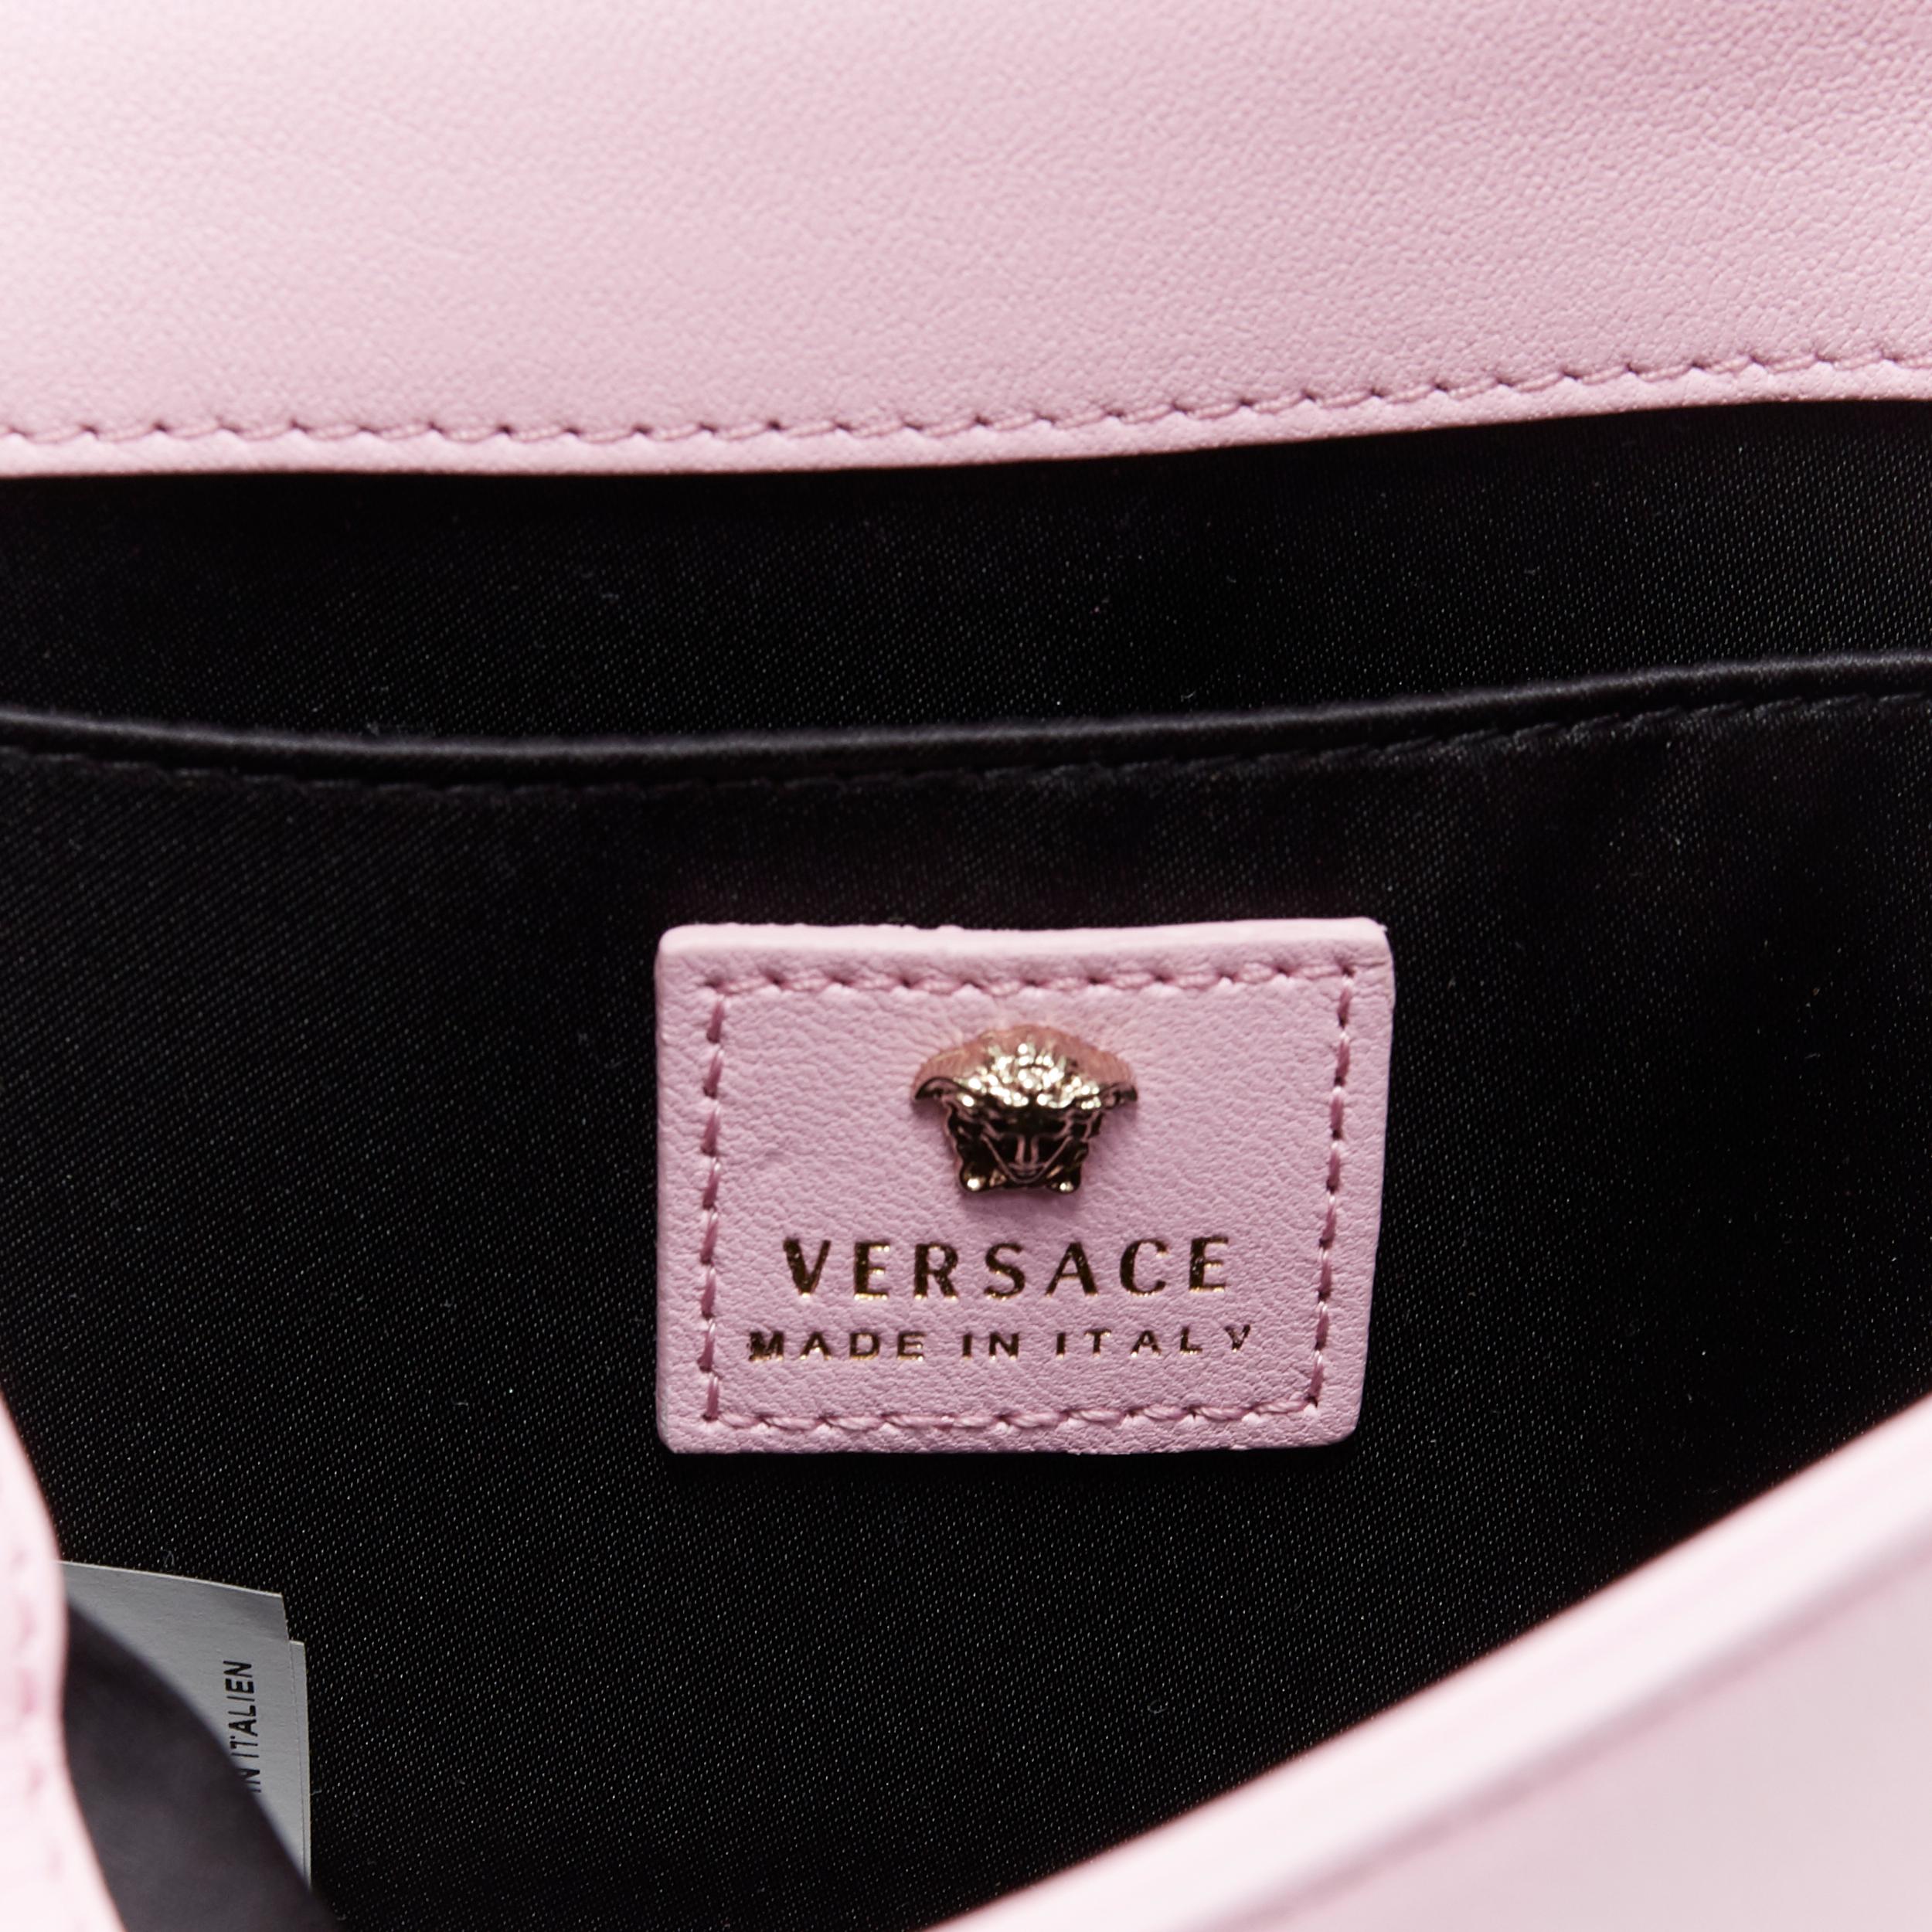 new VERSACE Palazzo Medusa light pink leather flap chain shoulder bag clutch 3